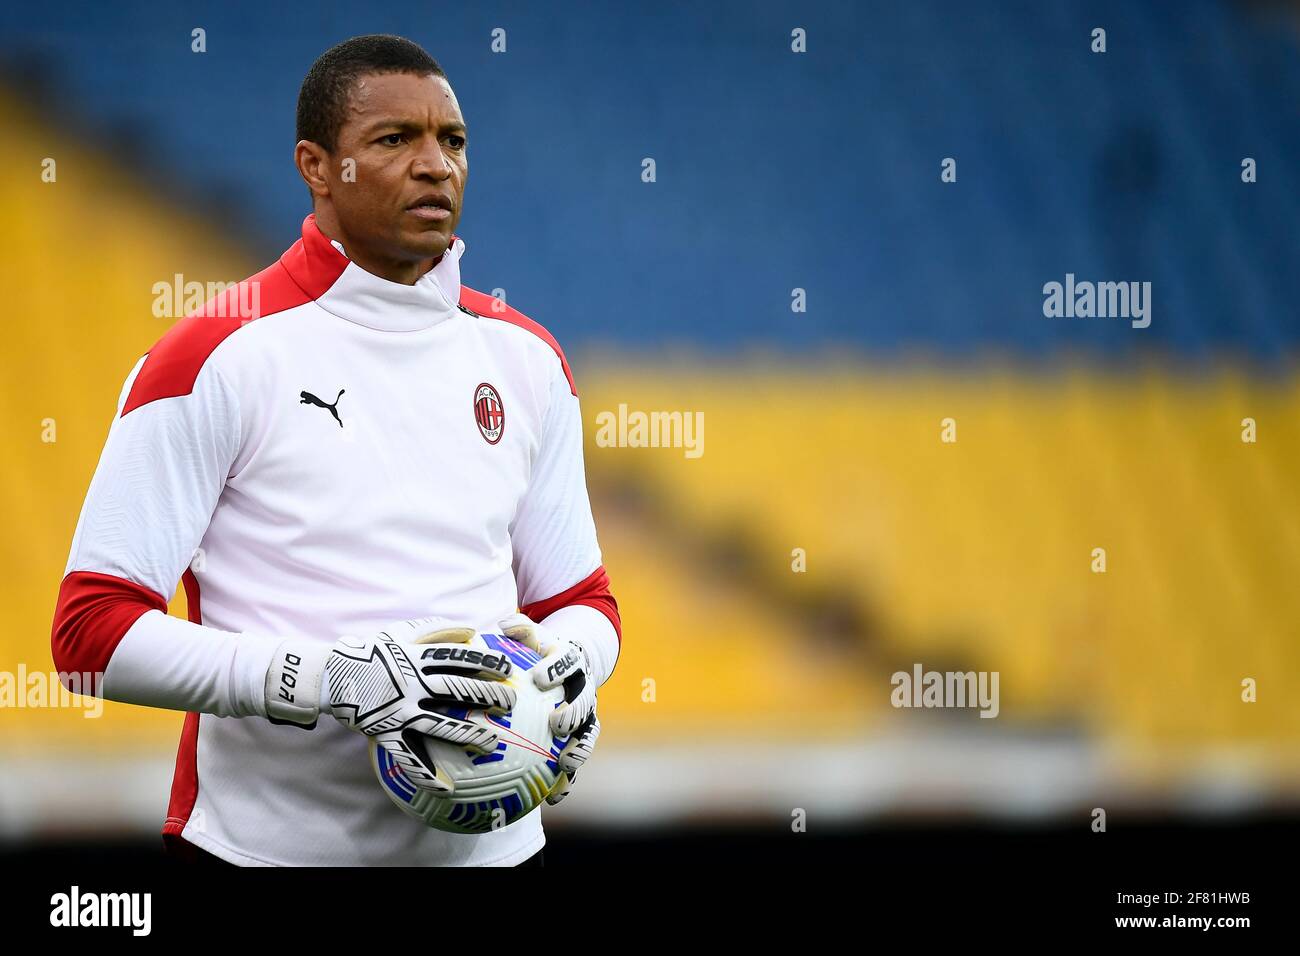 Parma, Italy - 10 April, 2021: Dida (Nelson de Jesus Silva), goalkeeping coach of AC Milan, holds a ball during warm up prior to the Serie A football match between Parma Calcio and AC Milan. AC Milan won 3-1 over Parma Calcio. Credit: Nicolò Campo/Alamy Live News Stock Photo